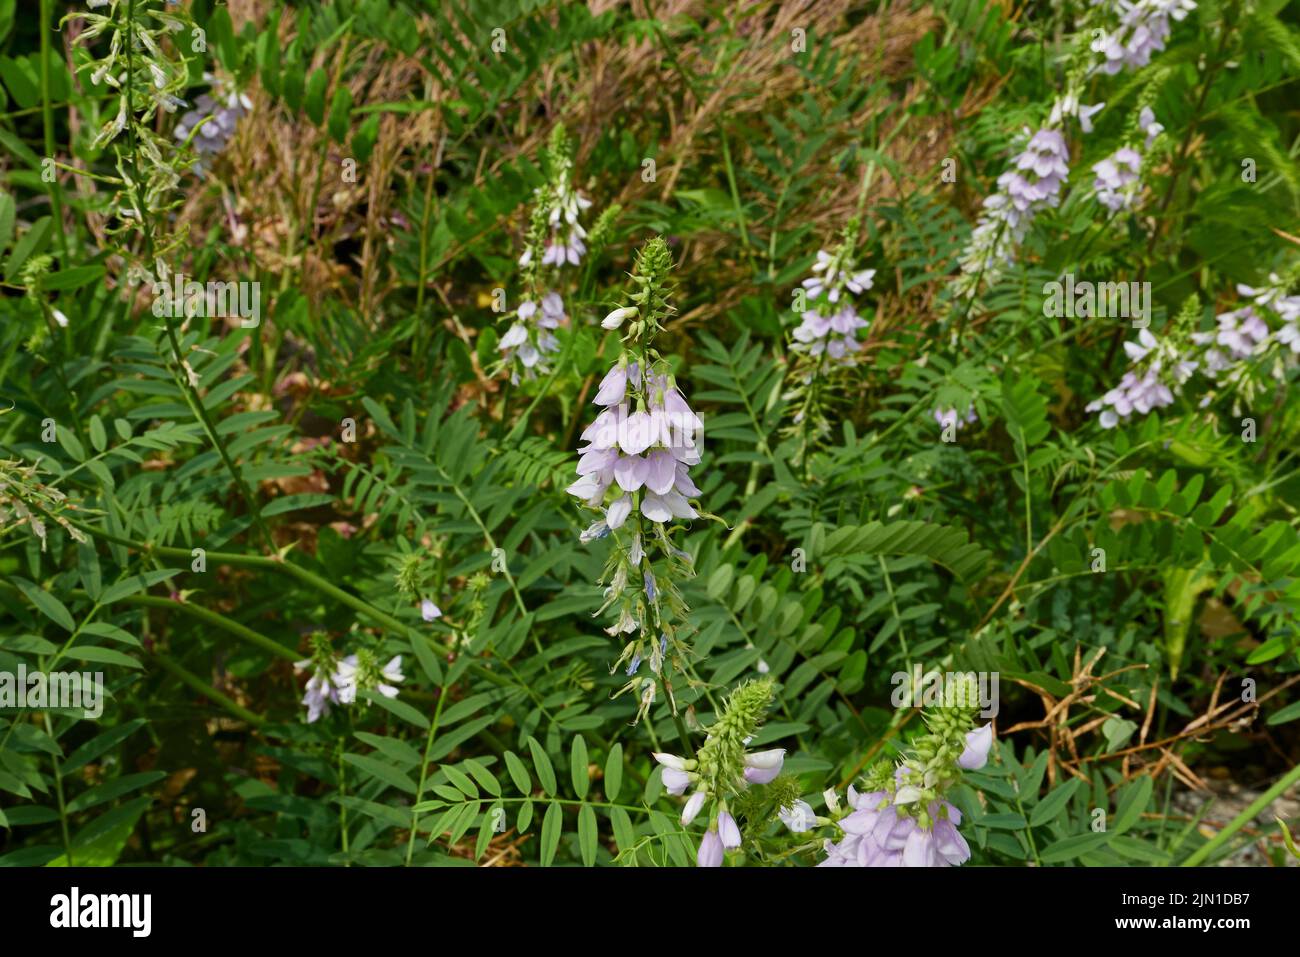 Lilac flowers of Galega officinalis herb Stock Photo